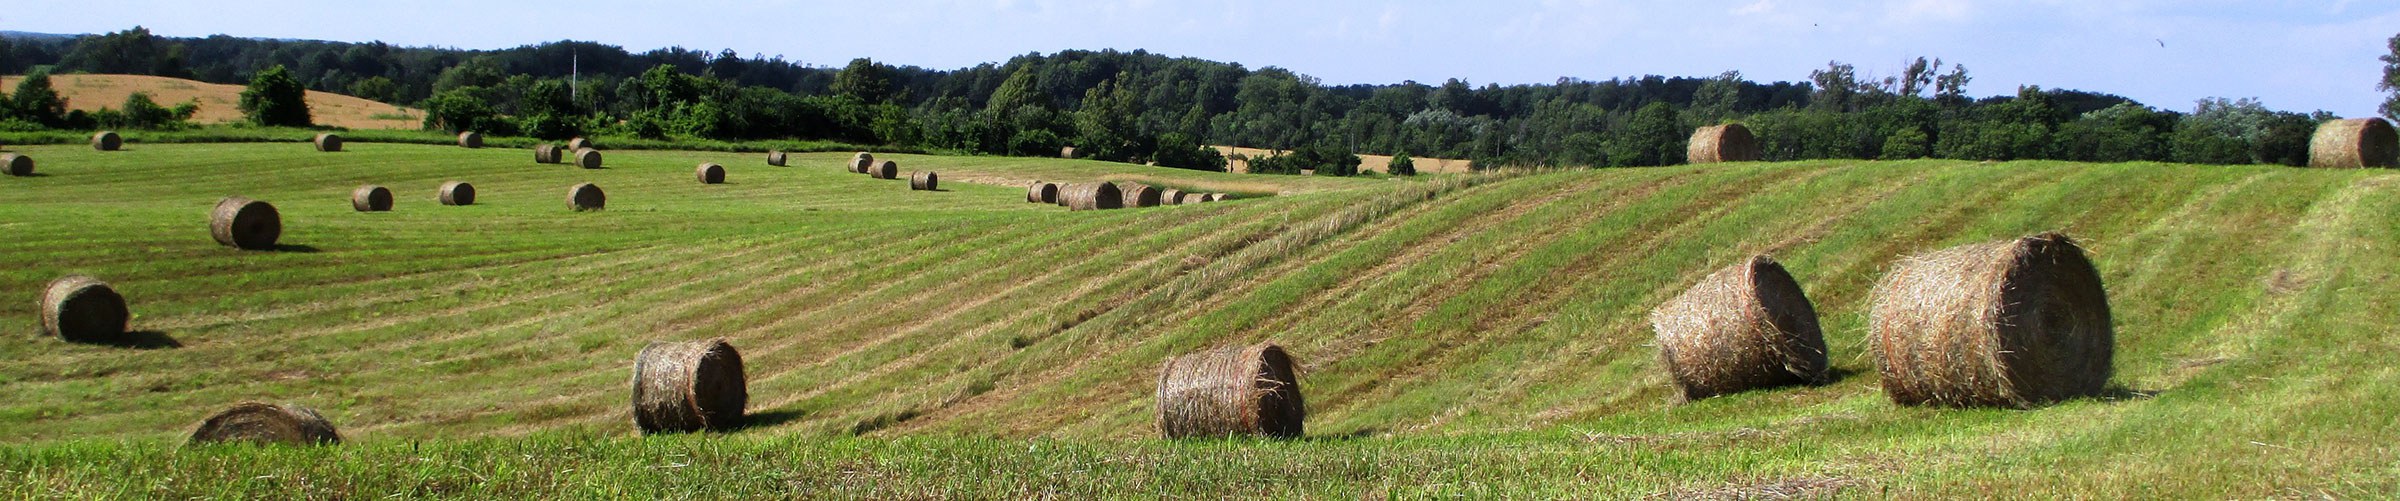 Panoramic view of Scotsdale’s hay fields at harvest time